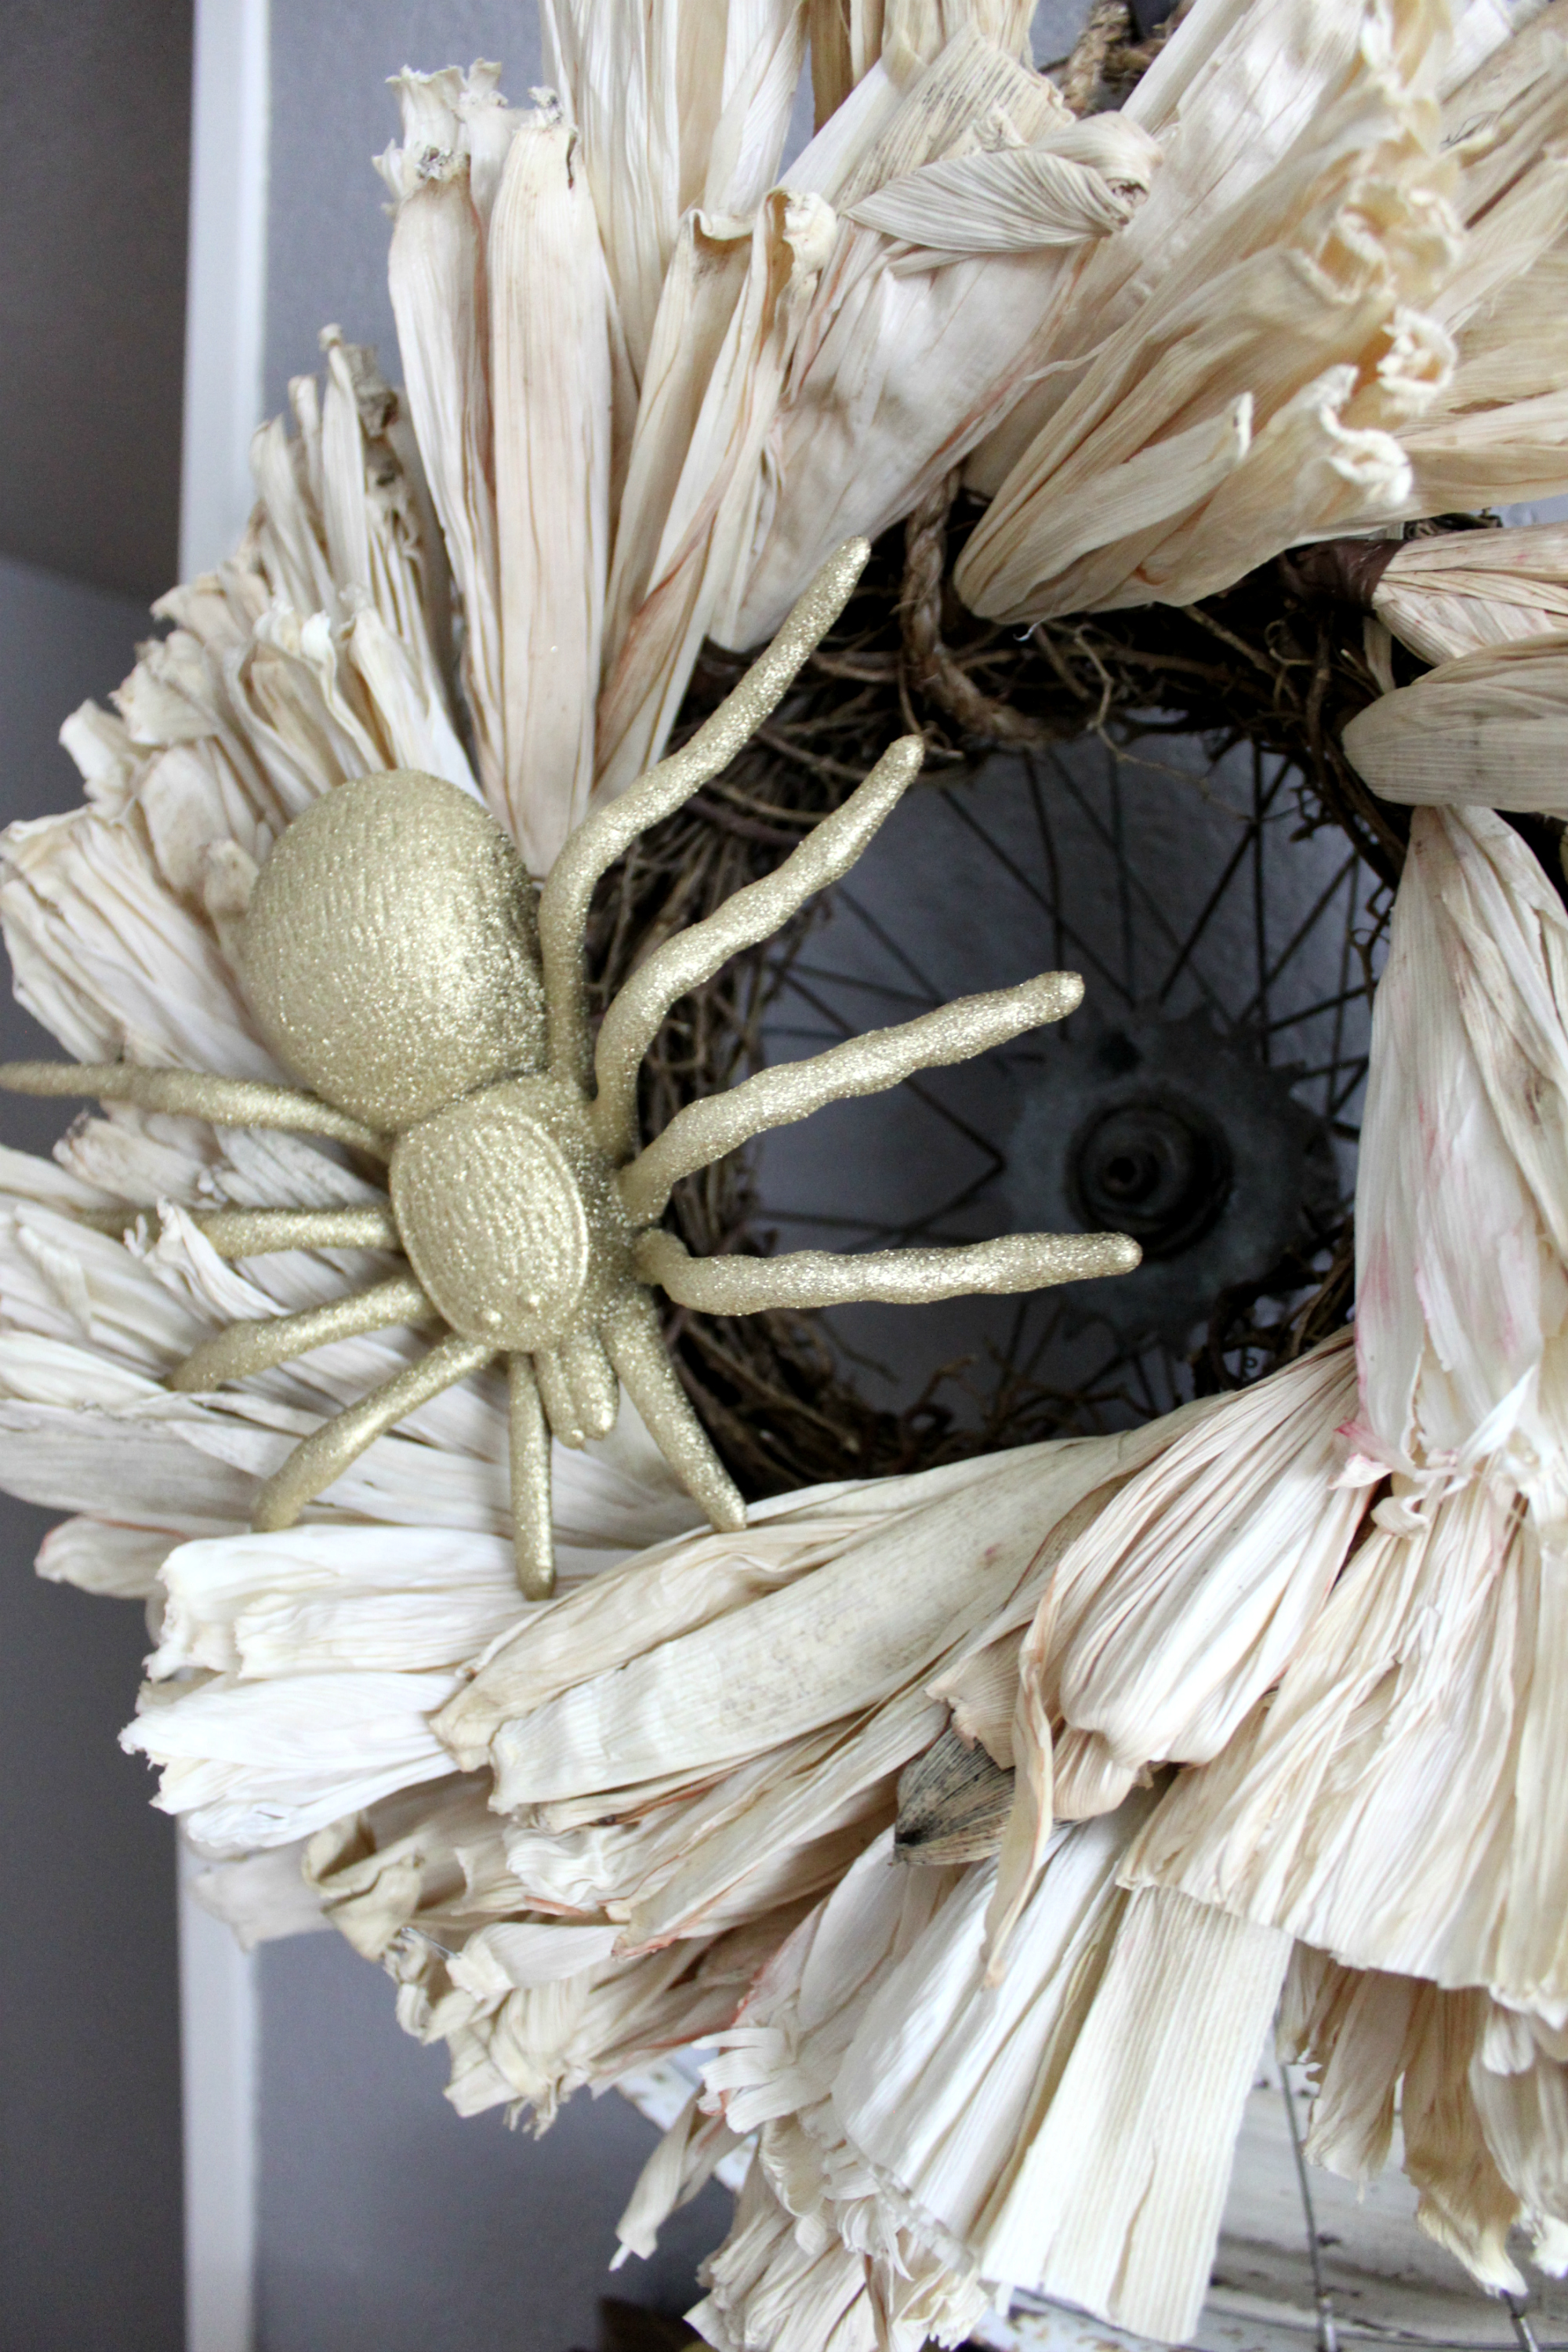 Last Minute Halloween Decor on a Budget by An Inspired Nest